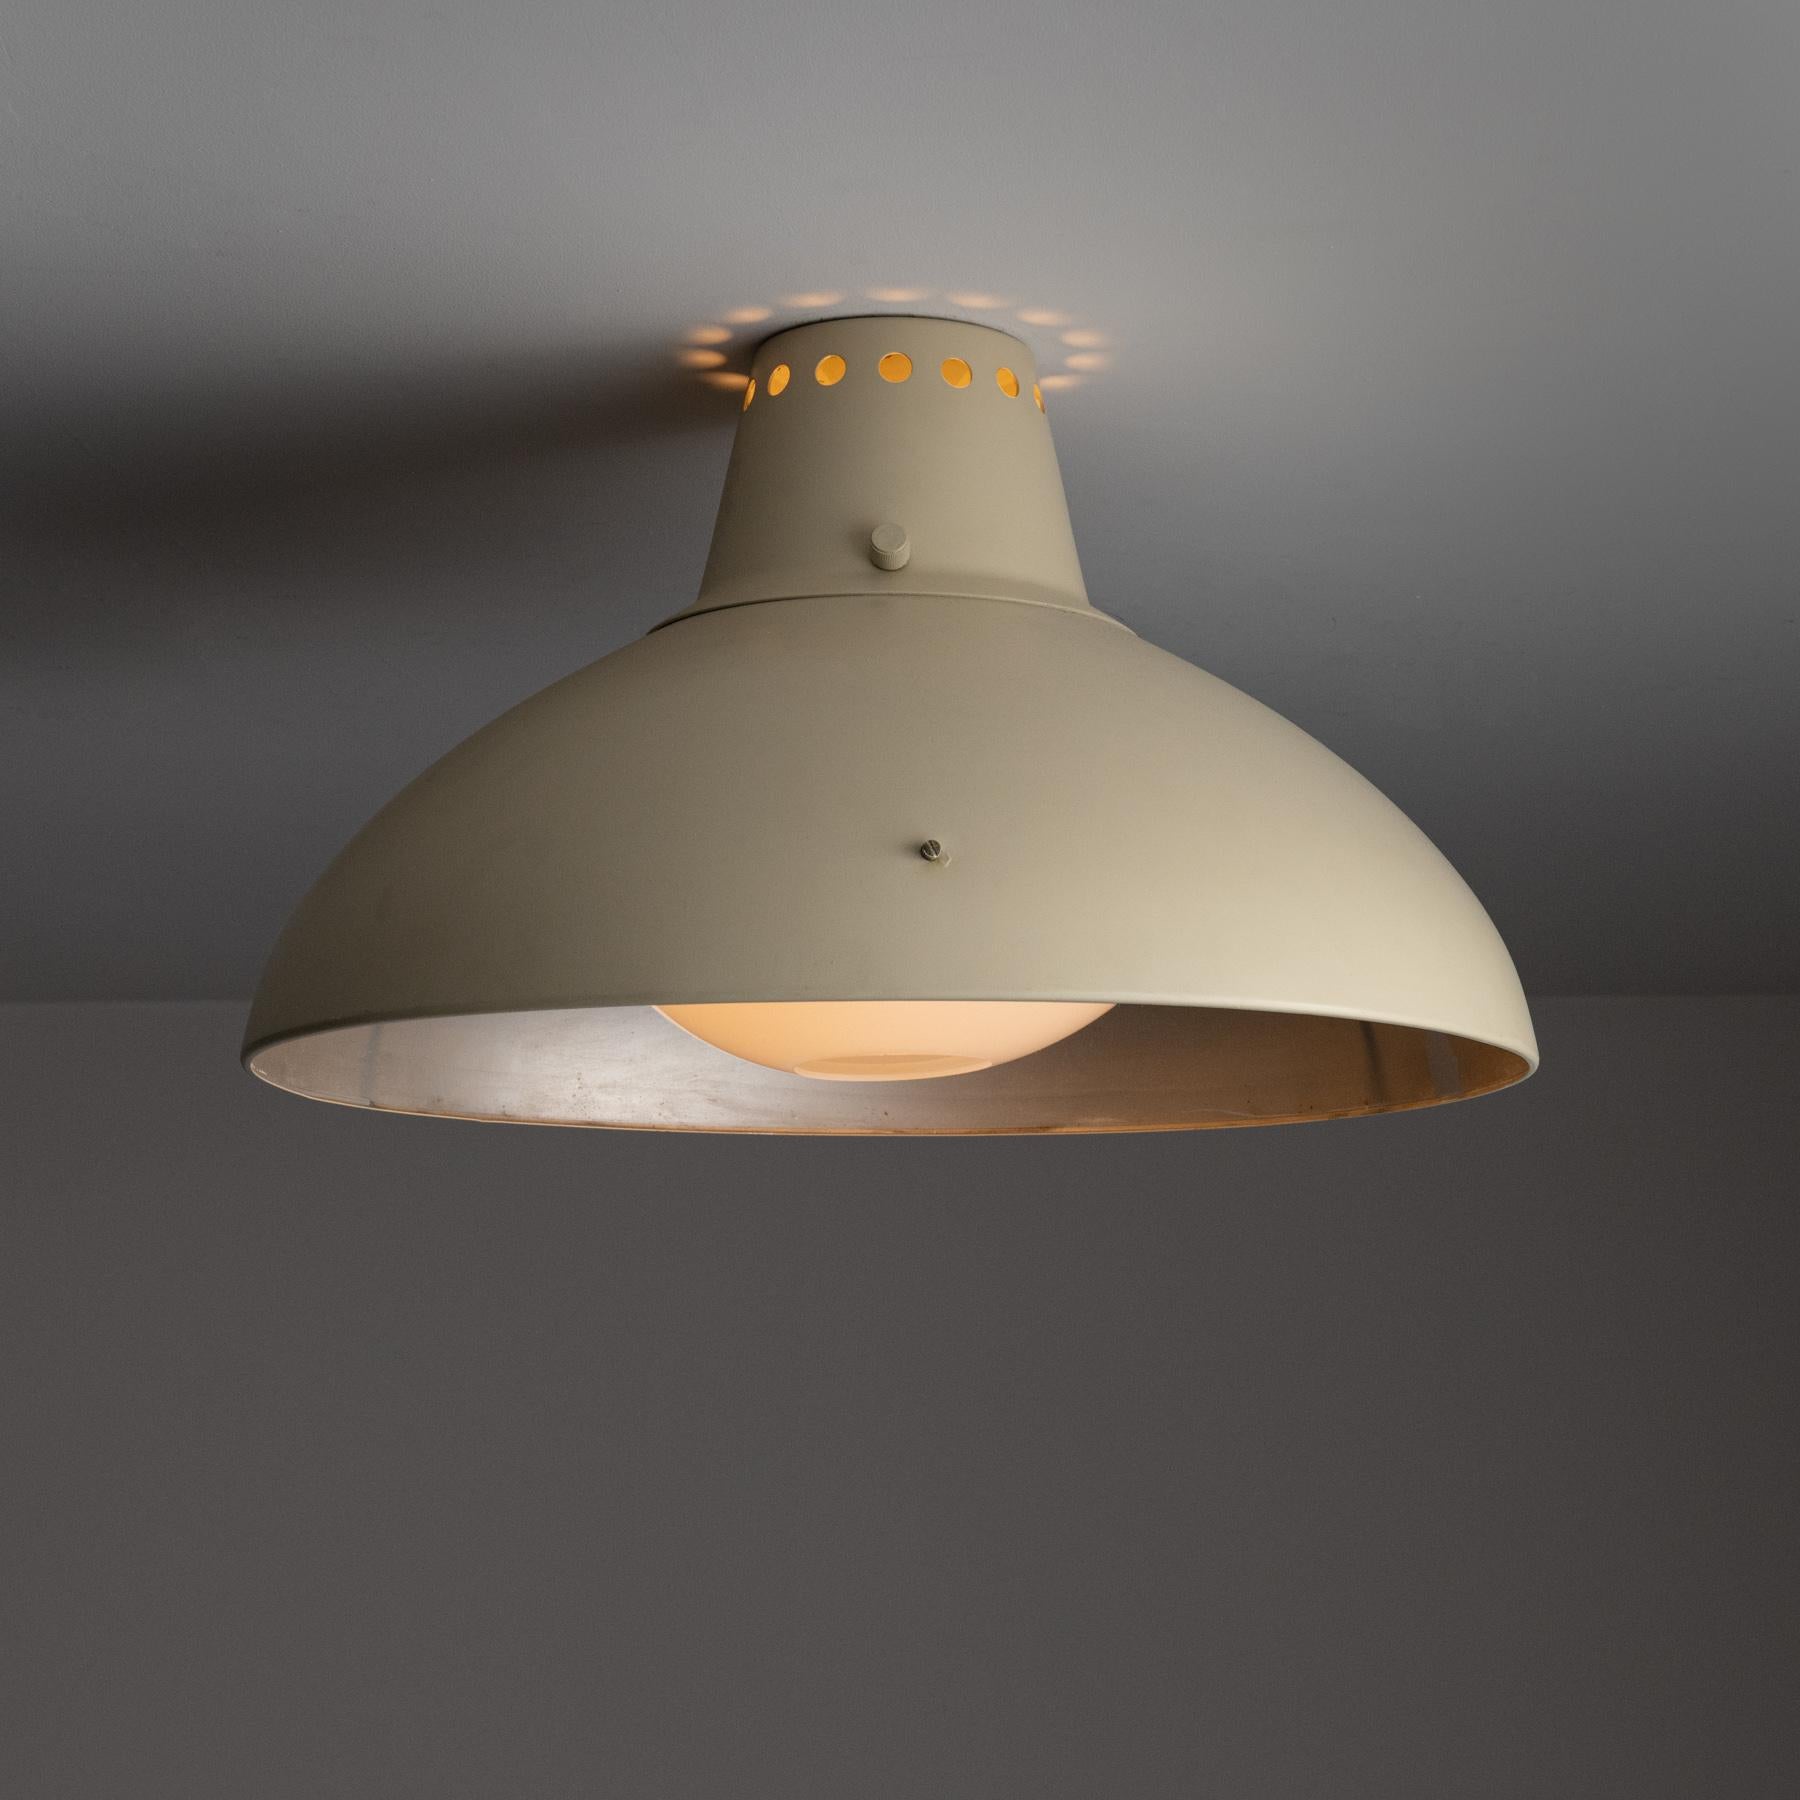 Model 2096 Flush Mount by Gino Sarfatti for Arteluce. Designed and manufactured in Italy, in 1958. An enameled formed shade supported by a tri-arm brace. An acrylic diffuser sits within this shade with a small punch hole, allowing for subtle back